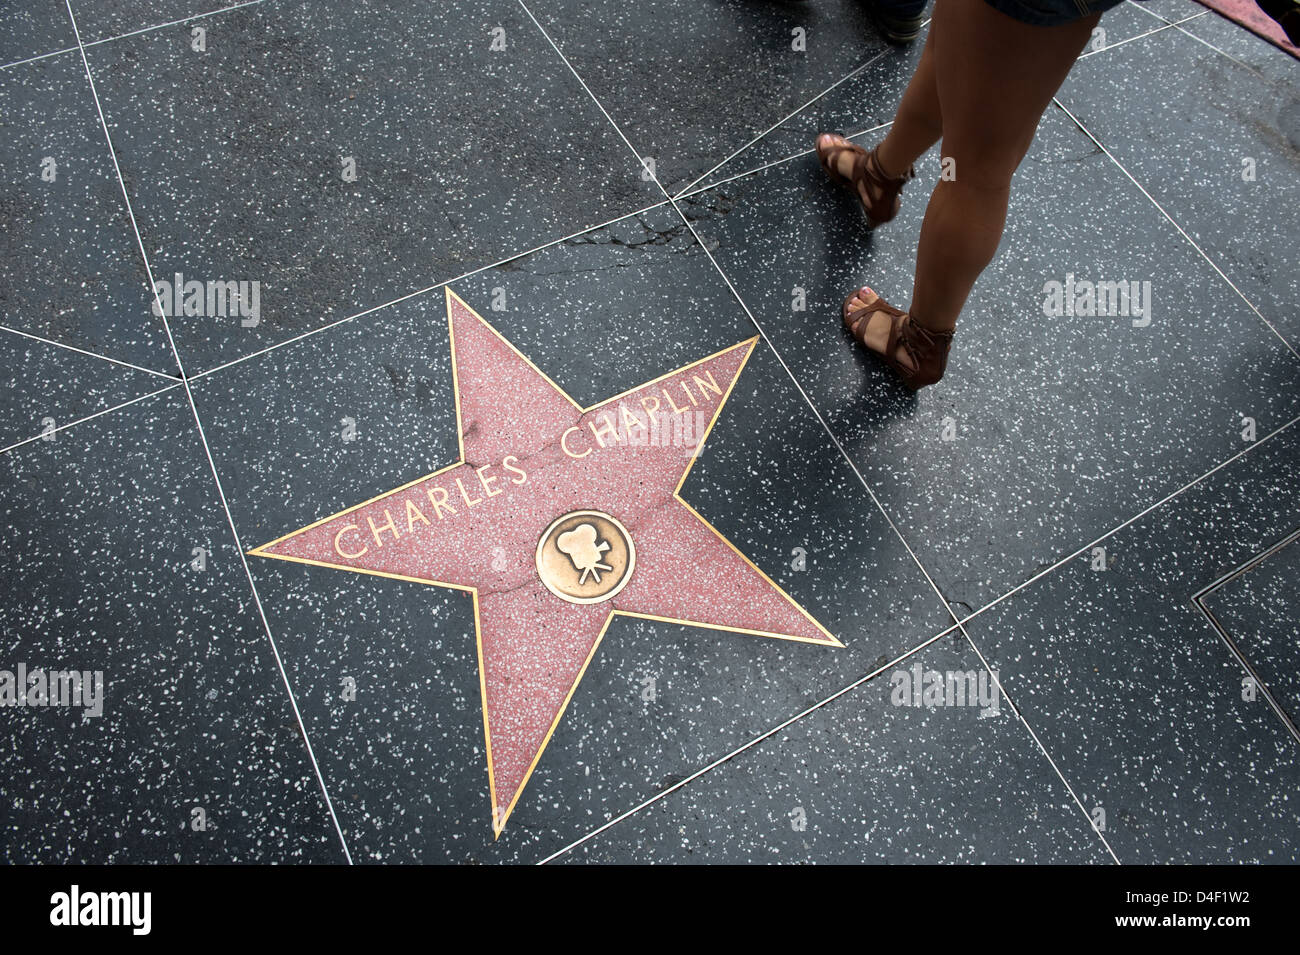 Los Angeles, USA, for Charles Chaplin star on the Walk of Fame Stock Photo